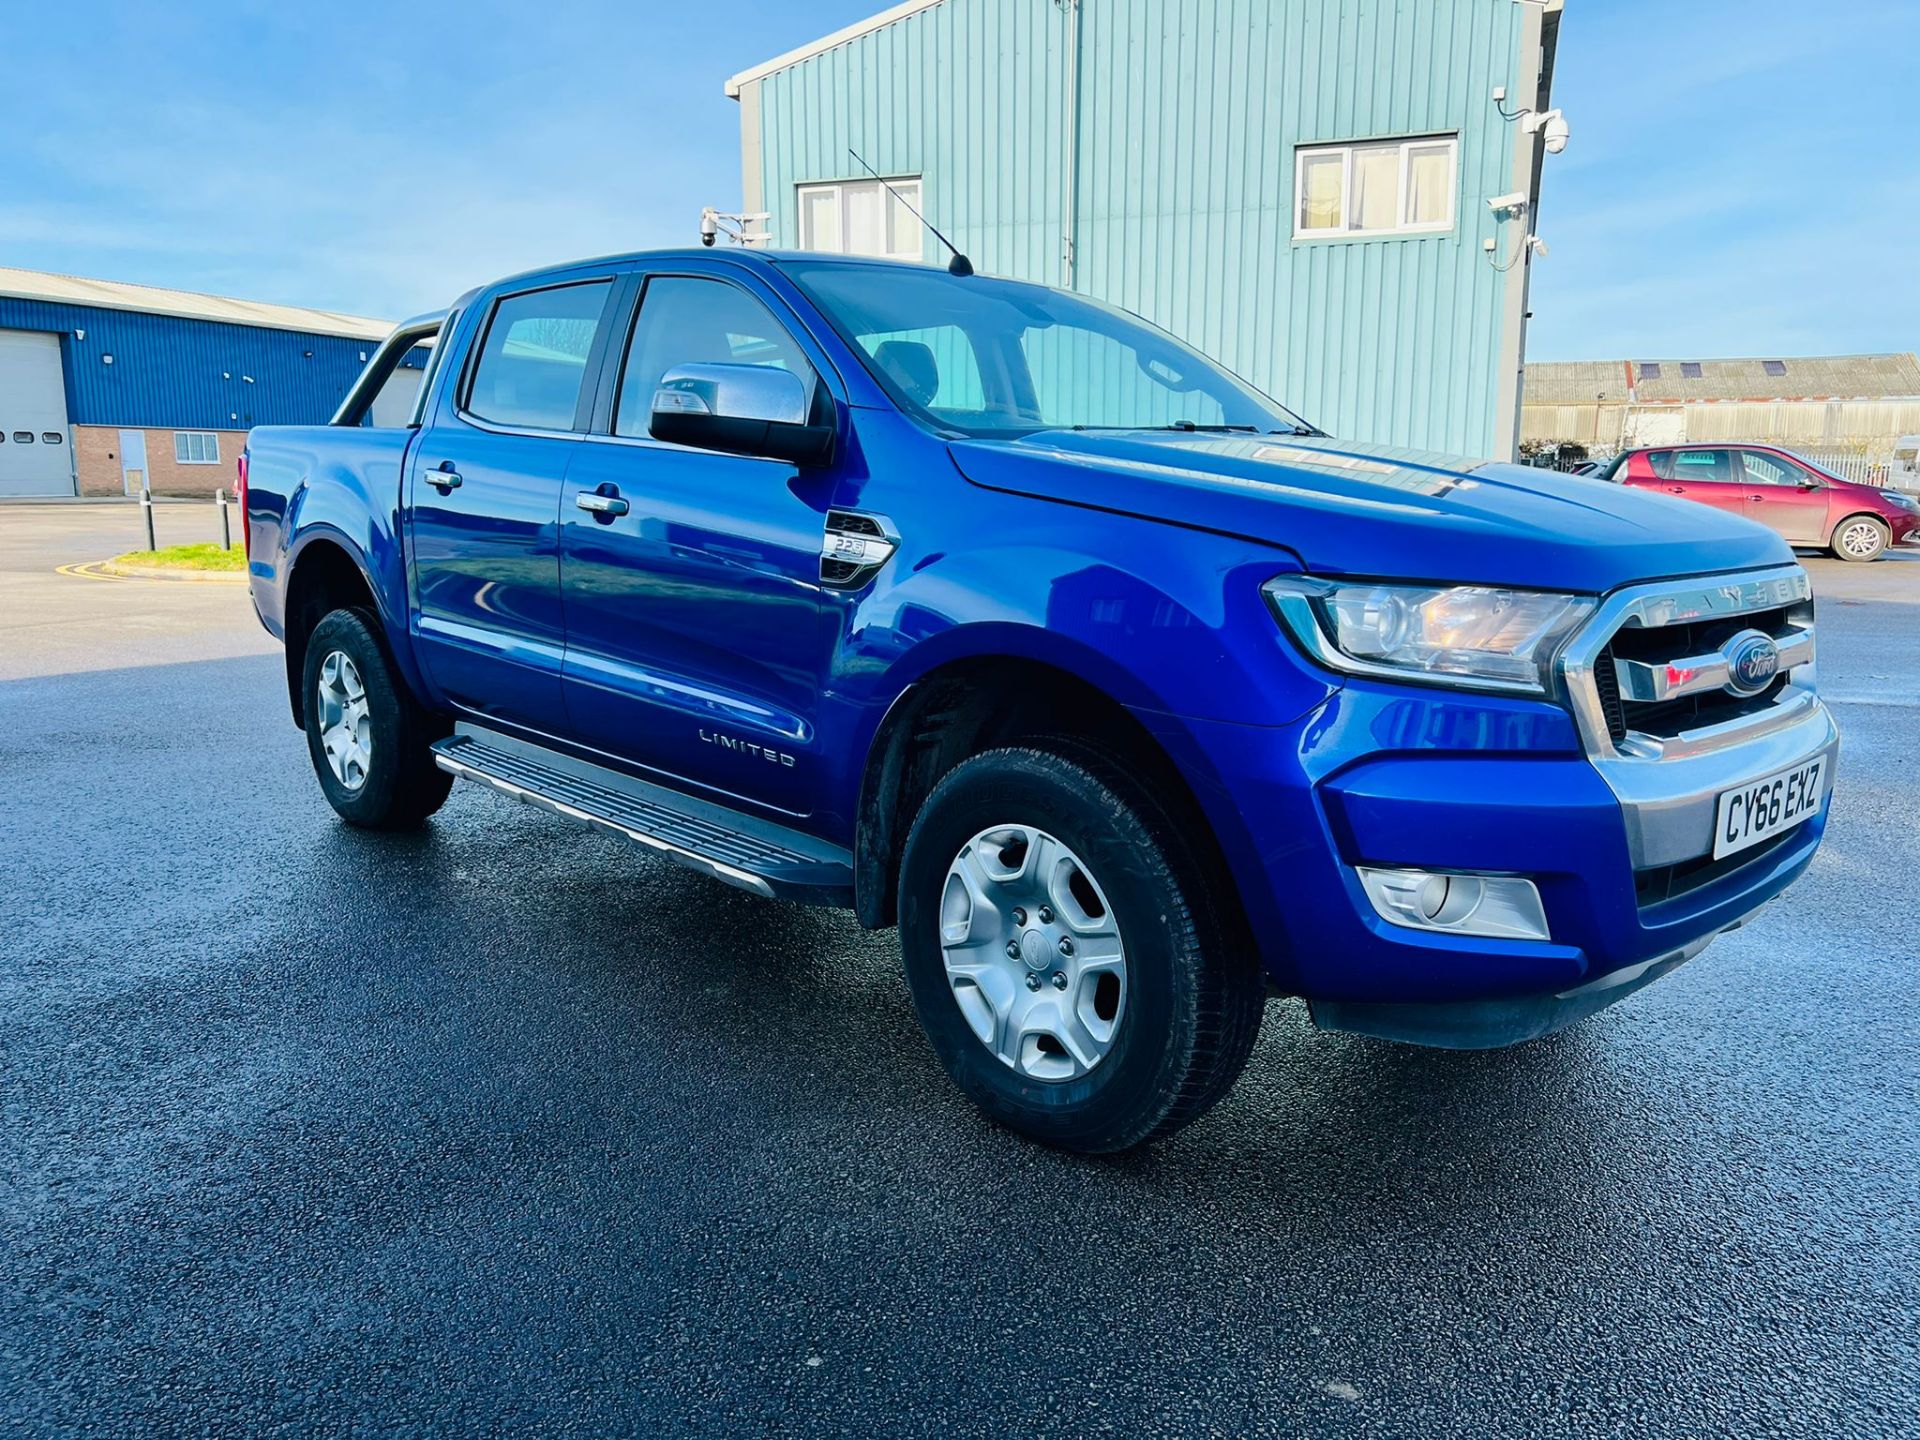 Ford Ranger 2.2 TDCI Limited 4x4 Double Cab - 2017 Model - Euro 6 - ULEZ Compliant - Air con - - Image 3 of 26